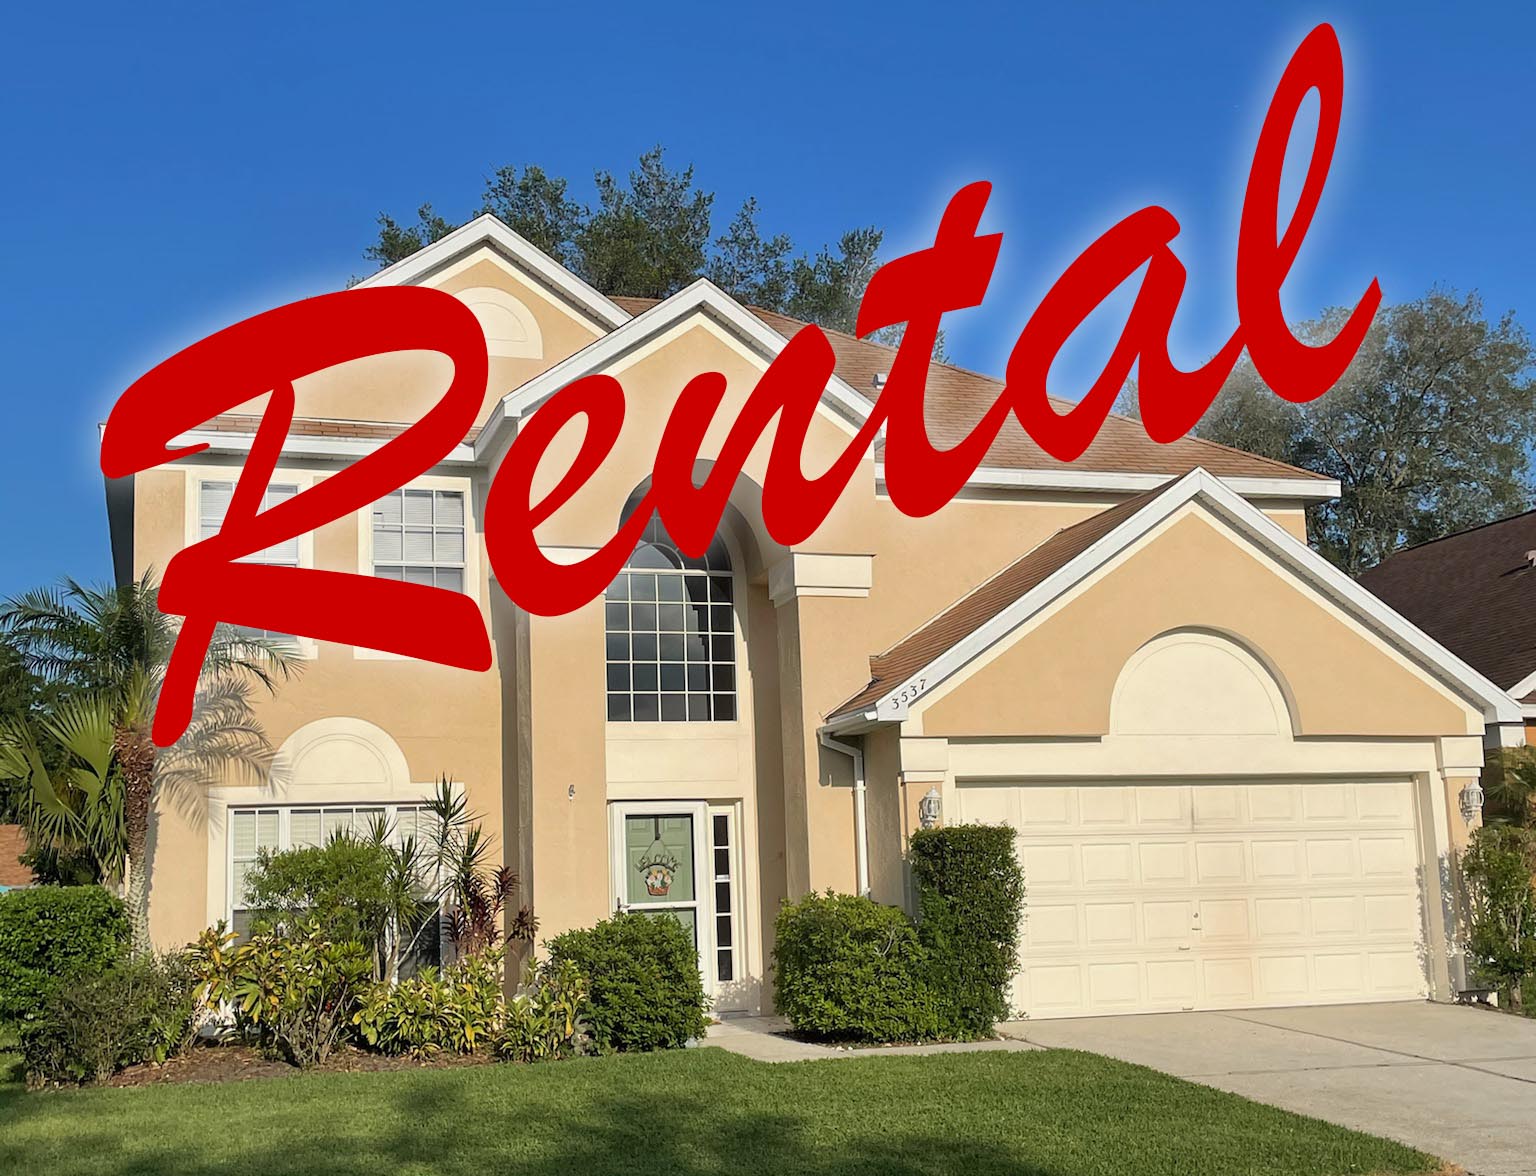 Furnished Rental - The Highlands Lake Mary